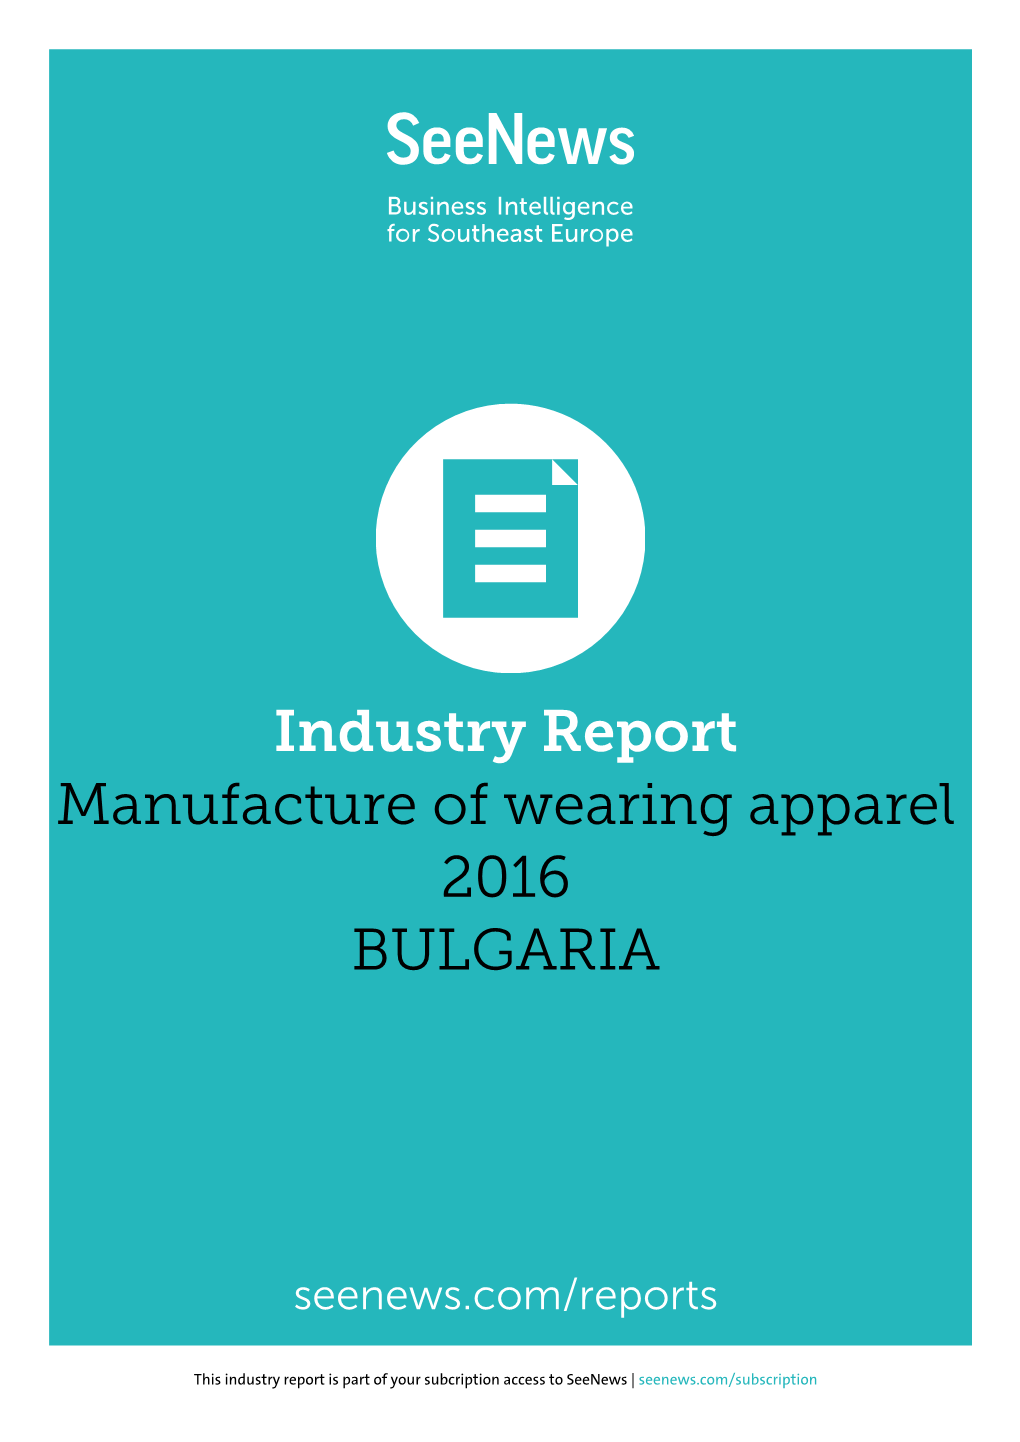 Industry Report Manufacture of Wearing Apparel 2016 BULGARIA